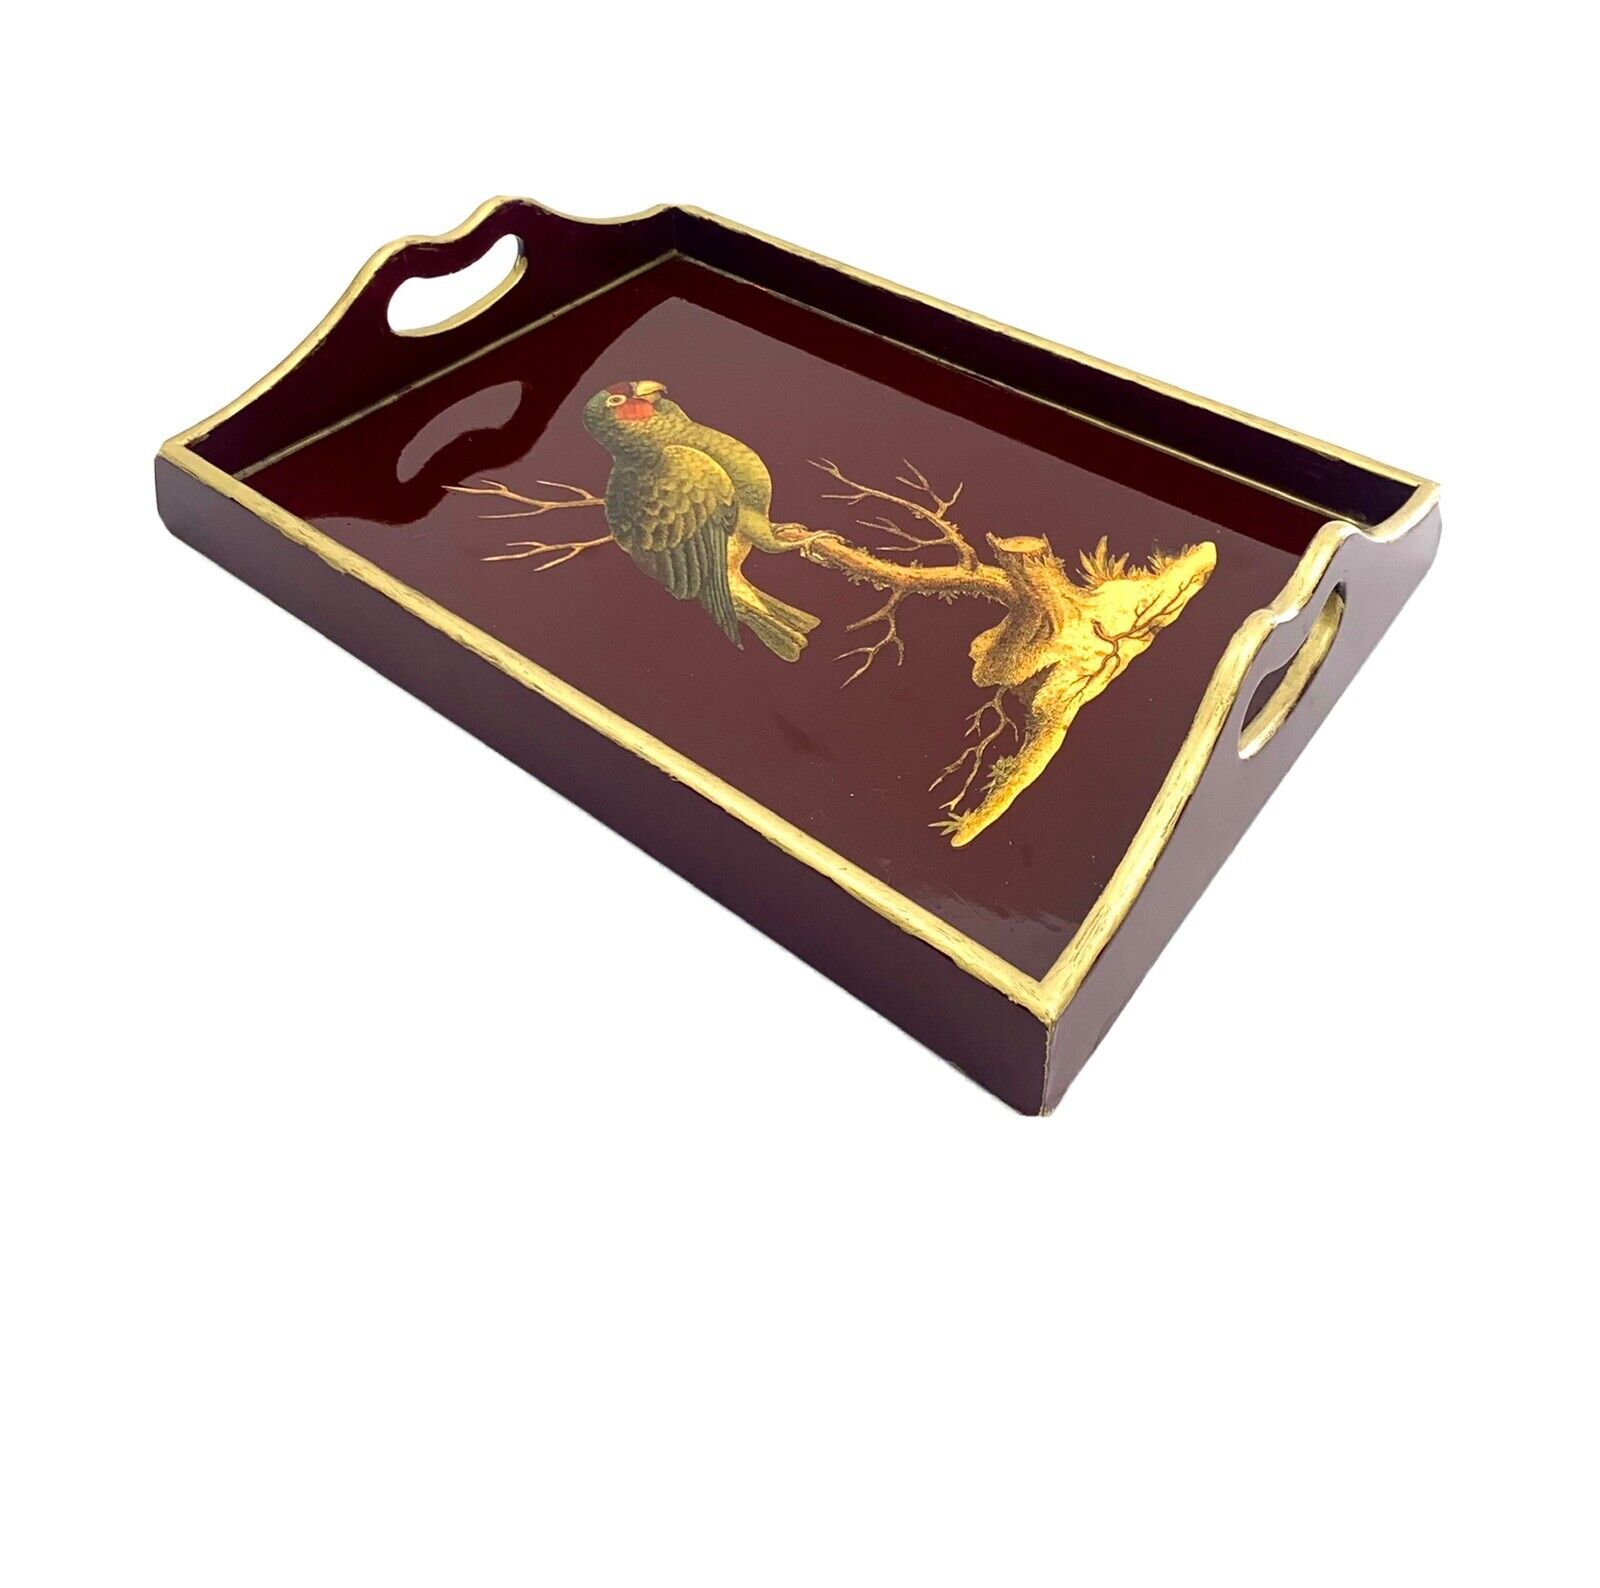 Tray with Bird Parrot Design Vintage Laquard Wood & Golden Accent Gift Decor